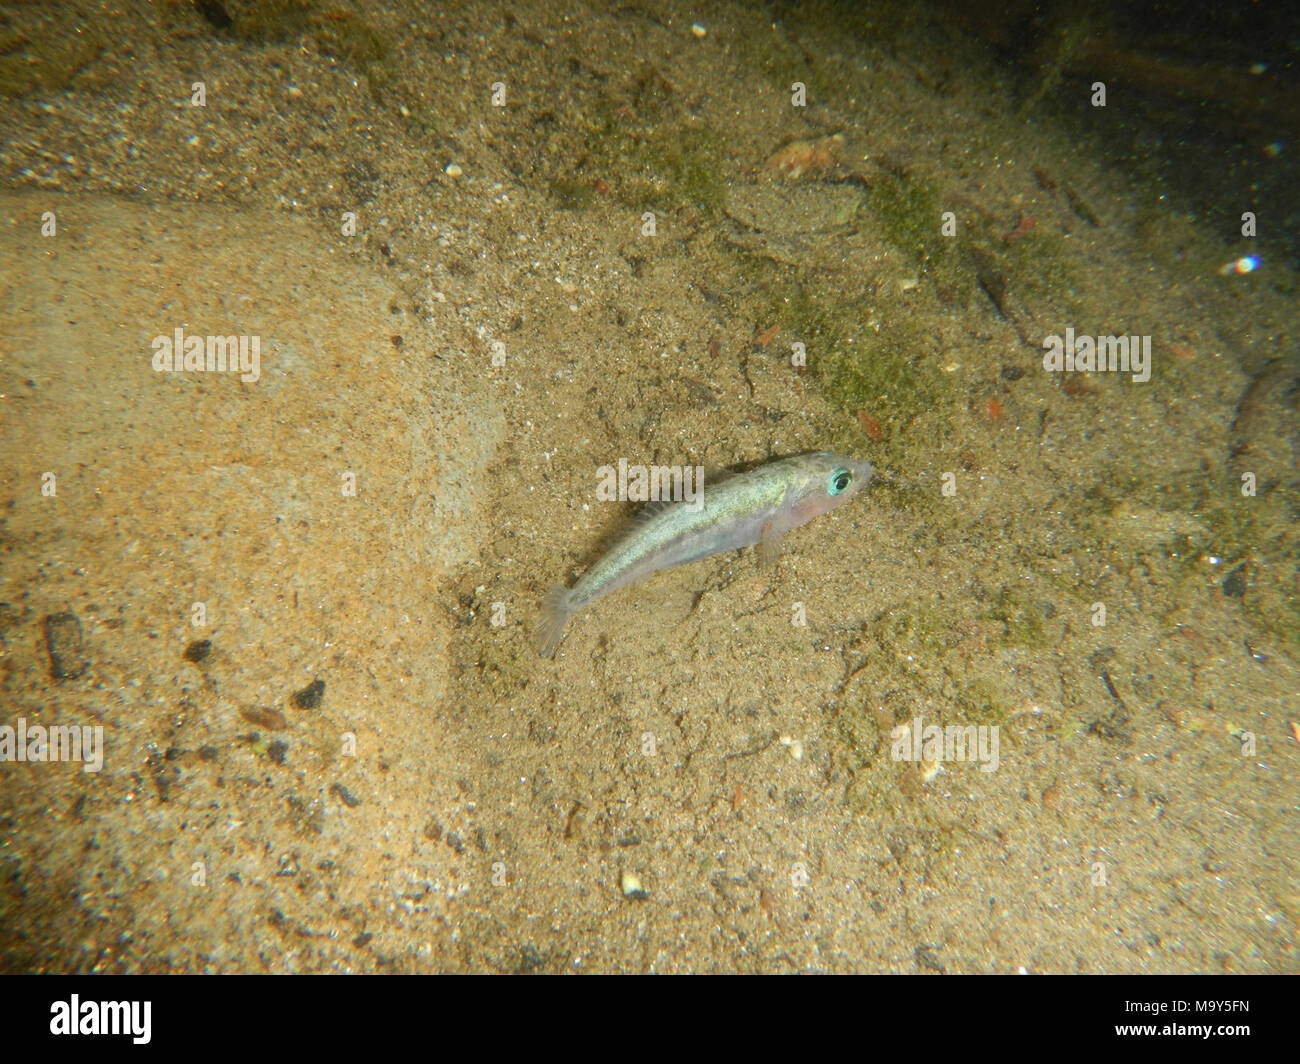 An unarmored threespine stickleback (UTS) swims in new habitat after. ANGELES NATIONAL FOREST, Calif. (April 14, 2017) - An unarmored threespine stickleback (UTS) swims in new habitat after being released into the wild by a team of biologists and scientists from the U.S. Fish and Wildlife Service and the California Department of Fish and Wildlife. One hundred and fifty-one fish were released following an emergency rescue late last year in response to a fire that threatened their habitat. Unarmored threespine sticklebacks are a federally and state endangered species. ( Stock Photo